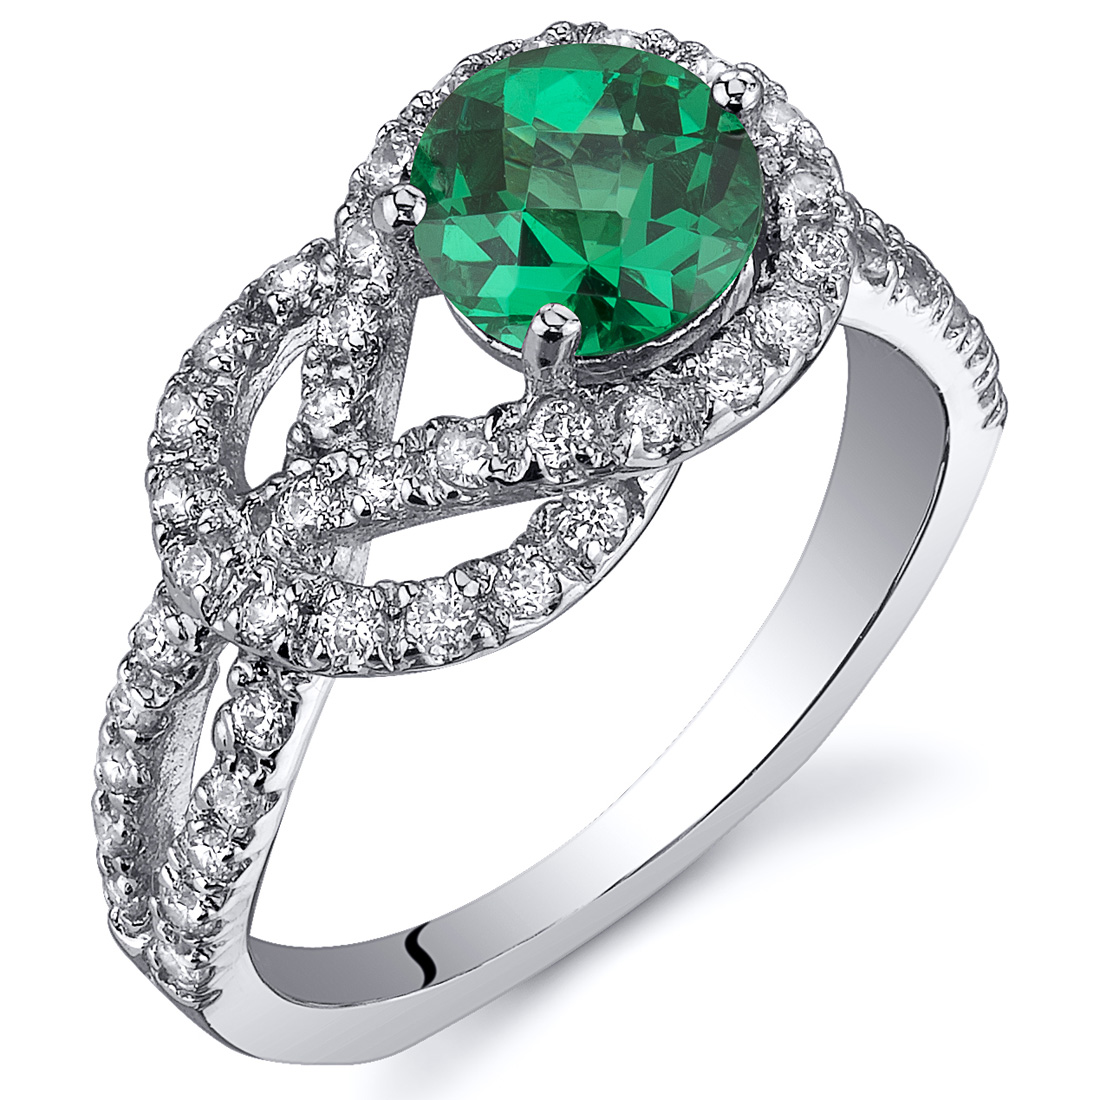 Gracefully Exquisite 0.75 cts Emerald Ring Sterling Silver Sizes 5 to 9 ...